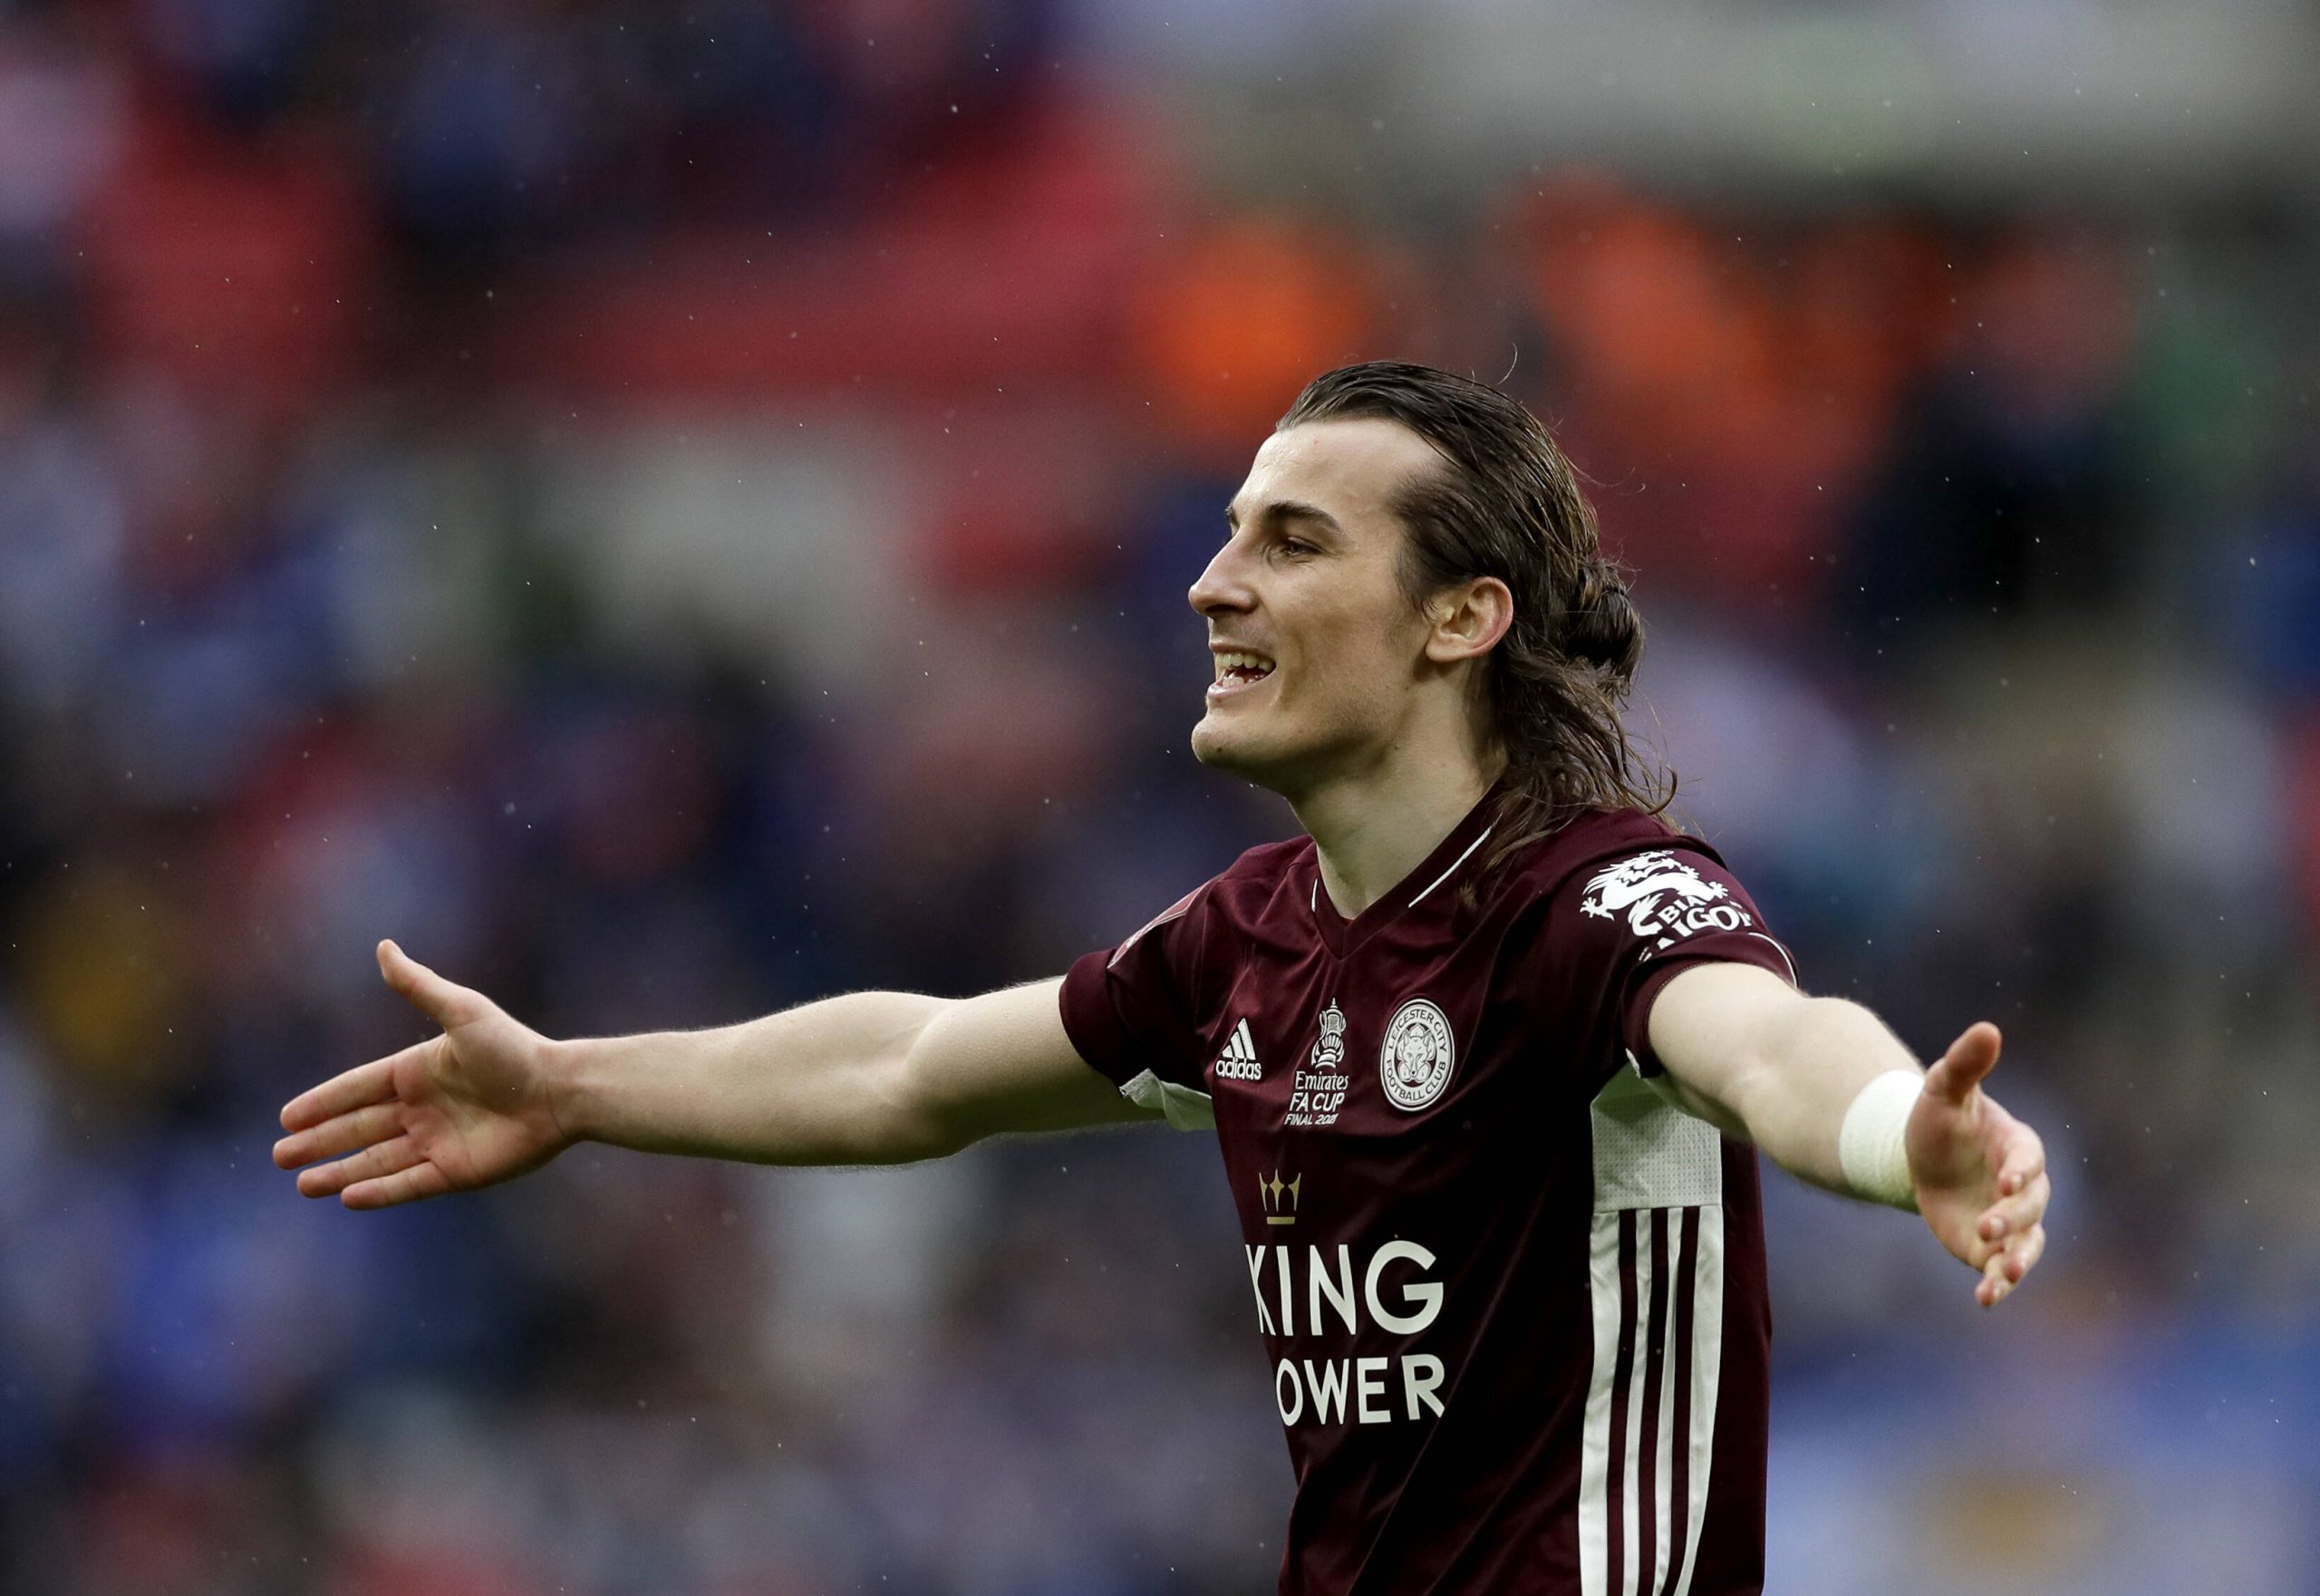 Leicester City centre-back Caglar Soyuncu attracting interest from Chelsea, Inter Milan and Villarreal.